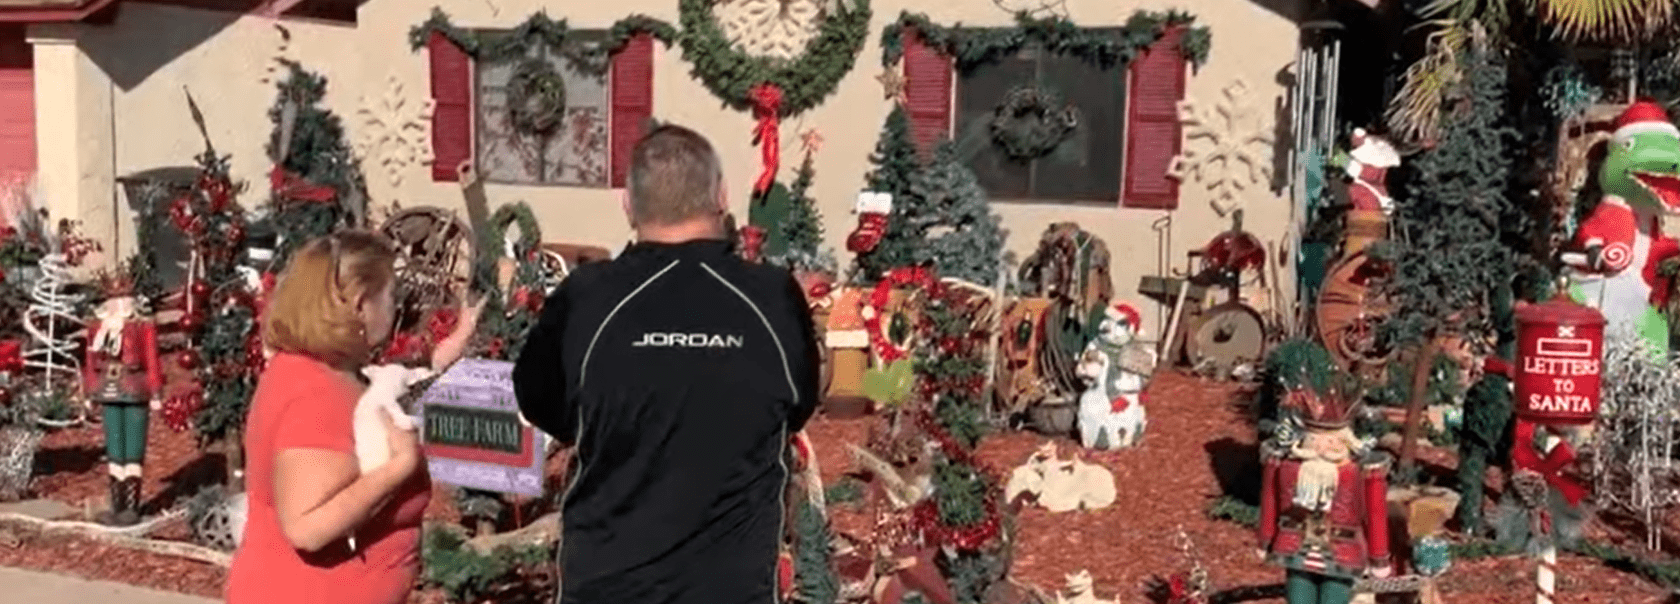 Andrew Kuzyk and his wife Pamela Kuzyk stand in front of the Christmas prize that Pamela gave her husband together .┃ Source: youtube.com/ABC15 Arizona